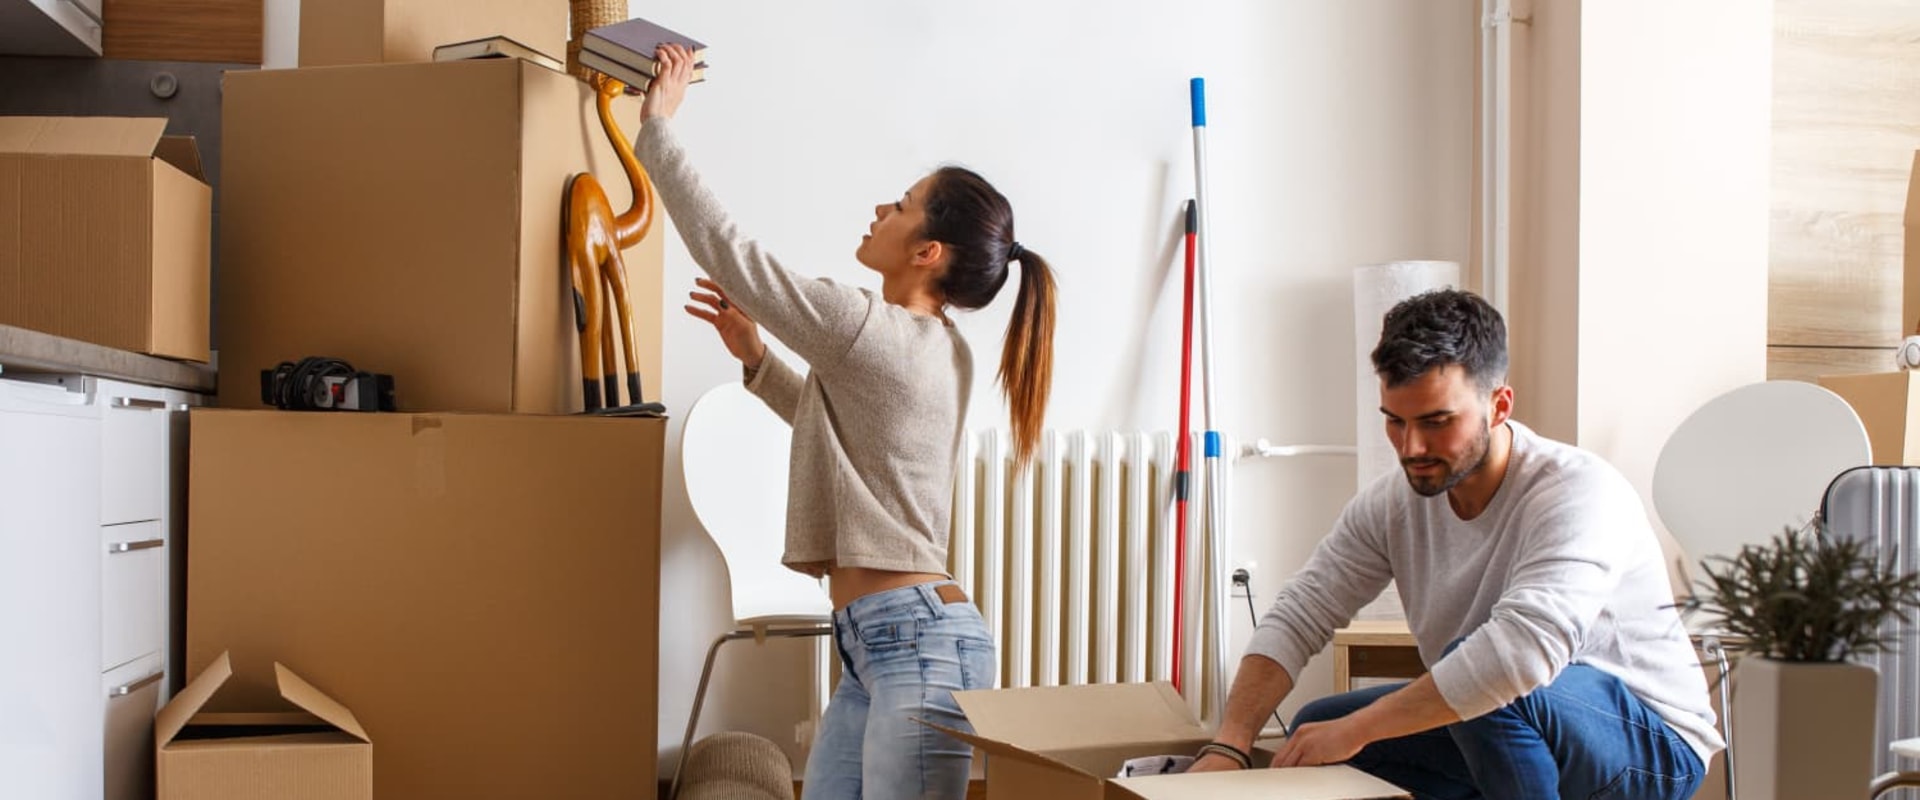 What are the best ways to organize a house move?